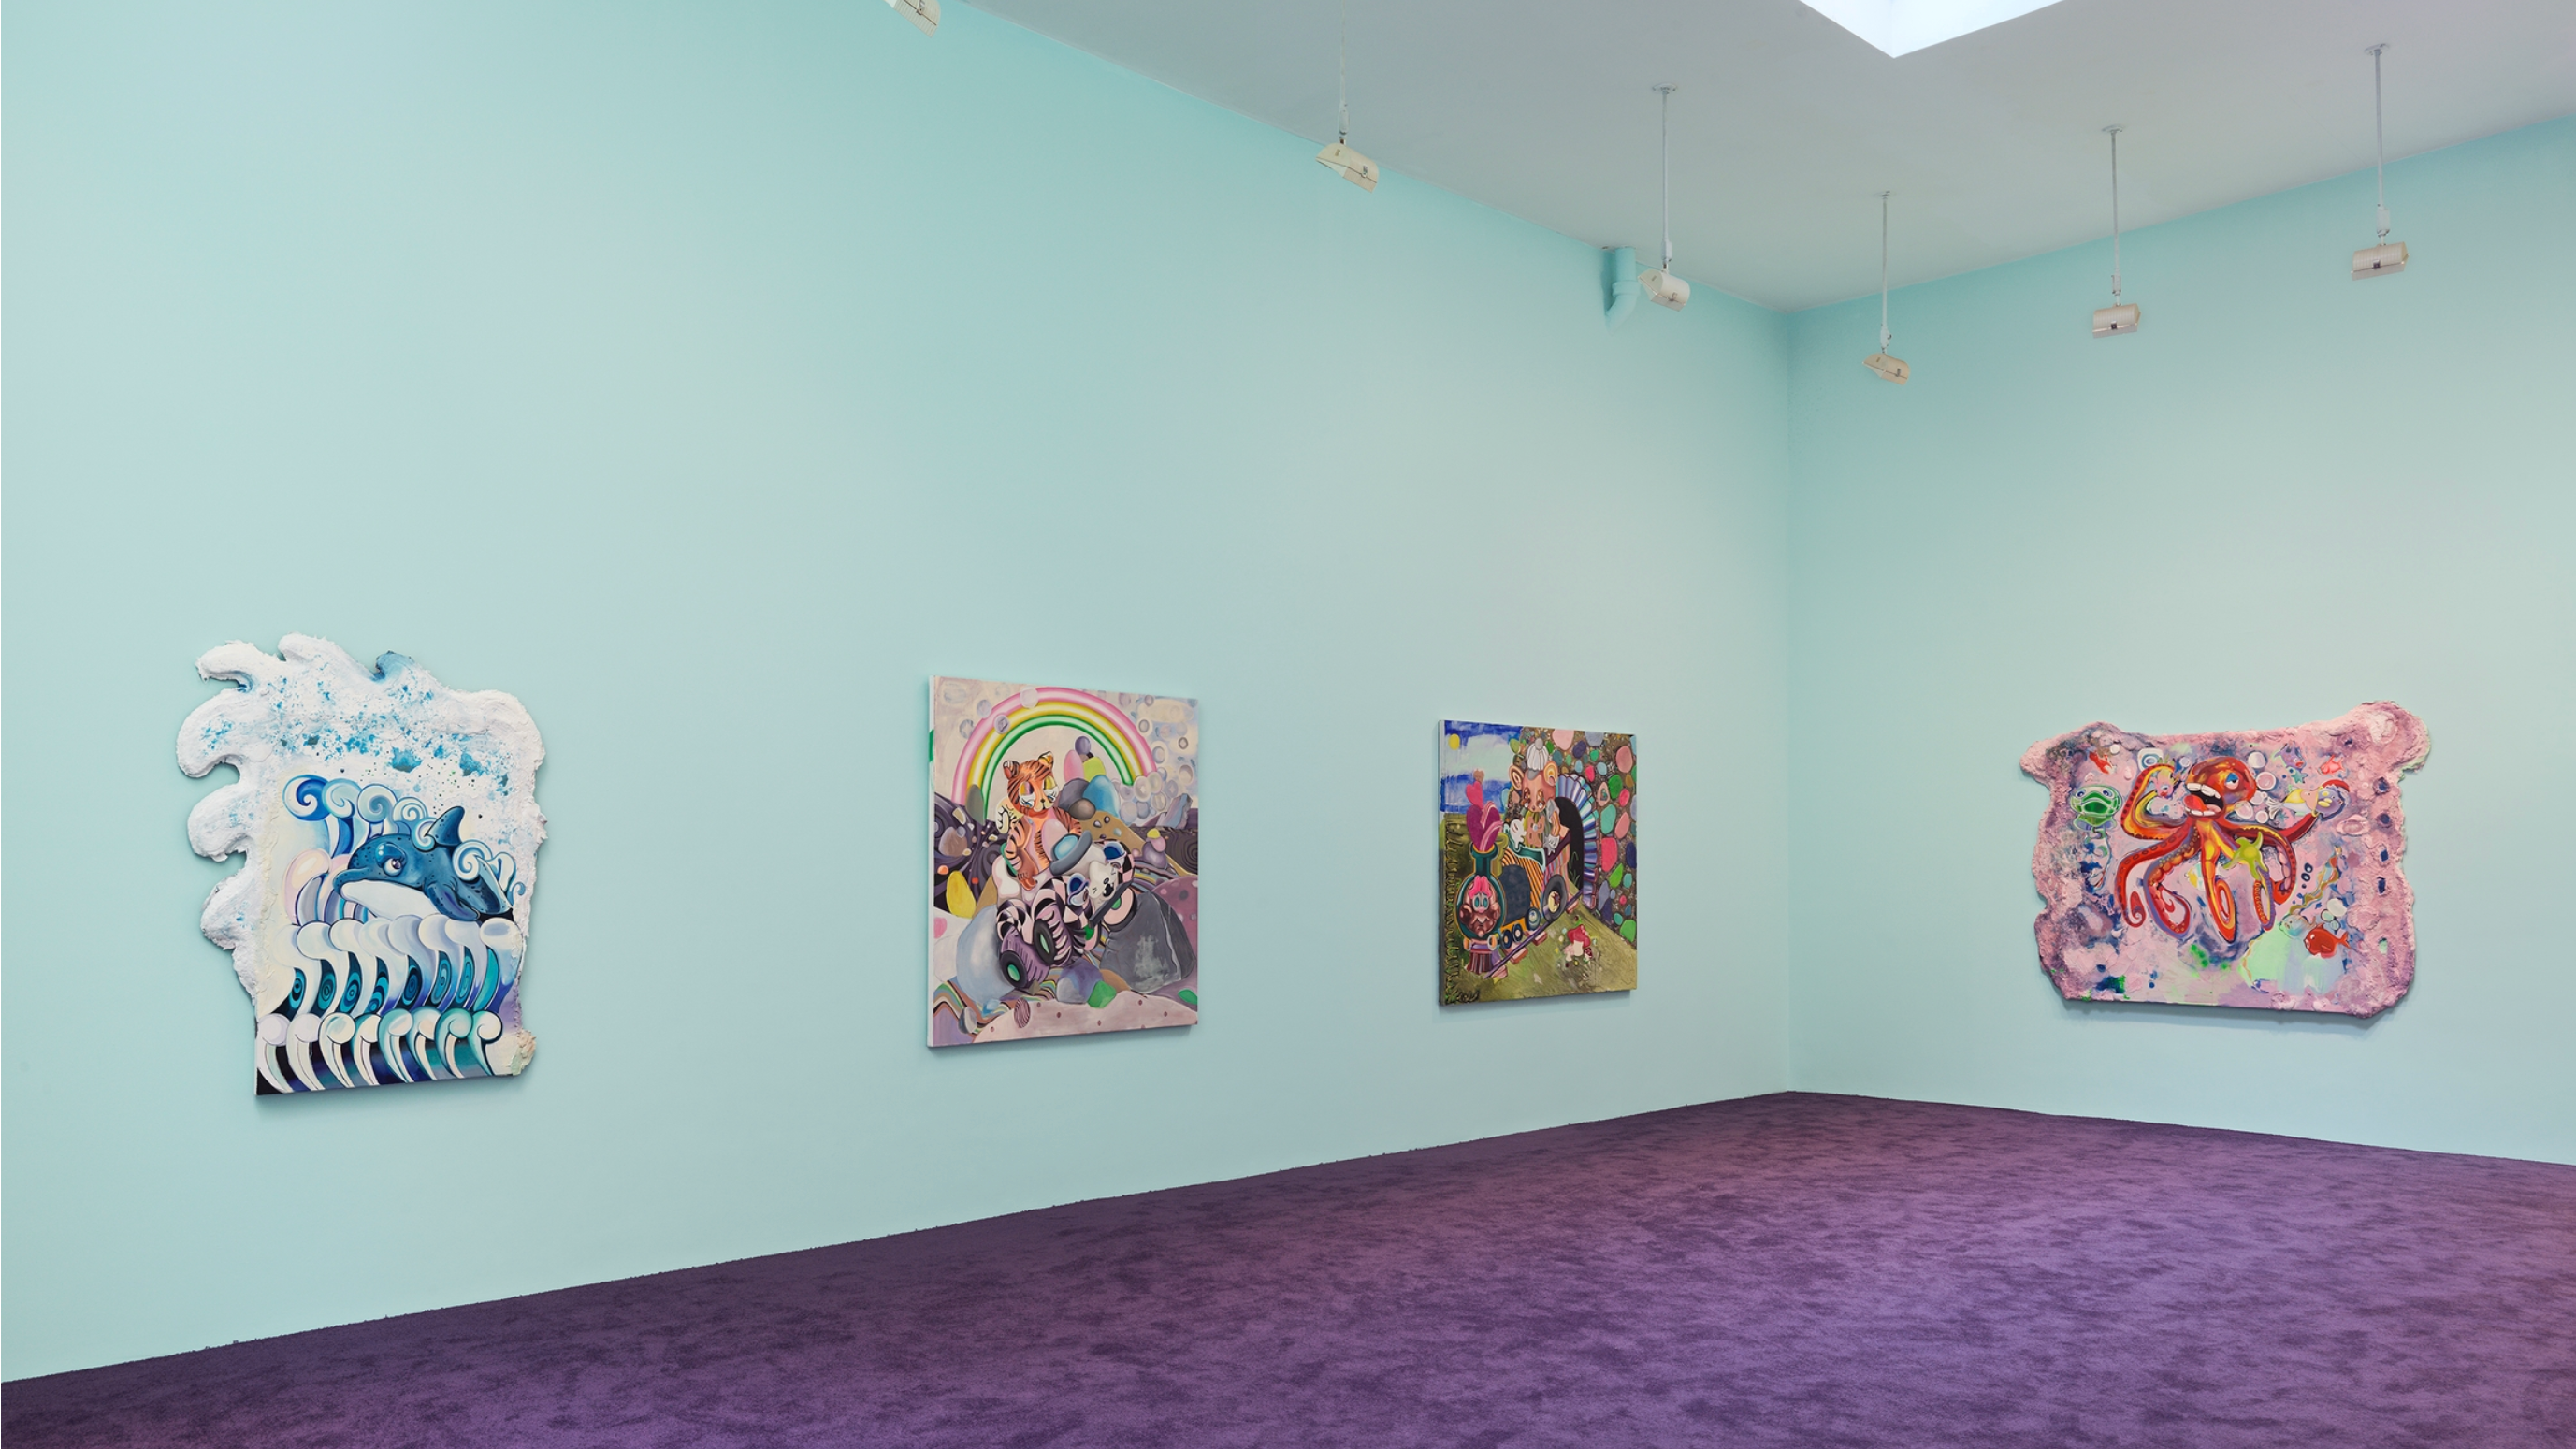 A corner of a room in which four colorful paintings hang on a light blue wall. The carpet on the floor is deep purple and the corner of a skylight can be seen peeking out at the top of the image.